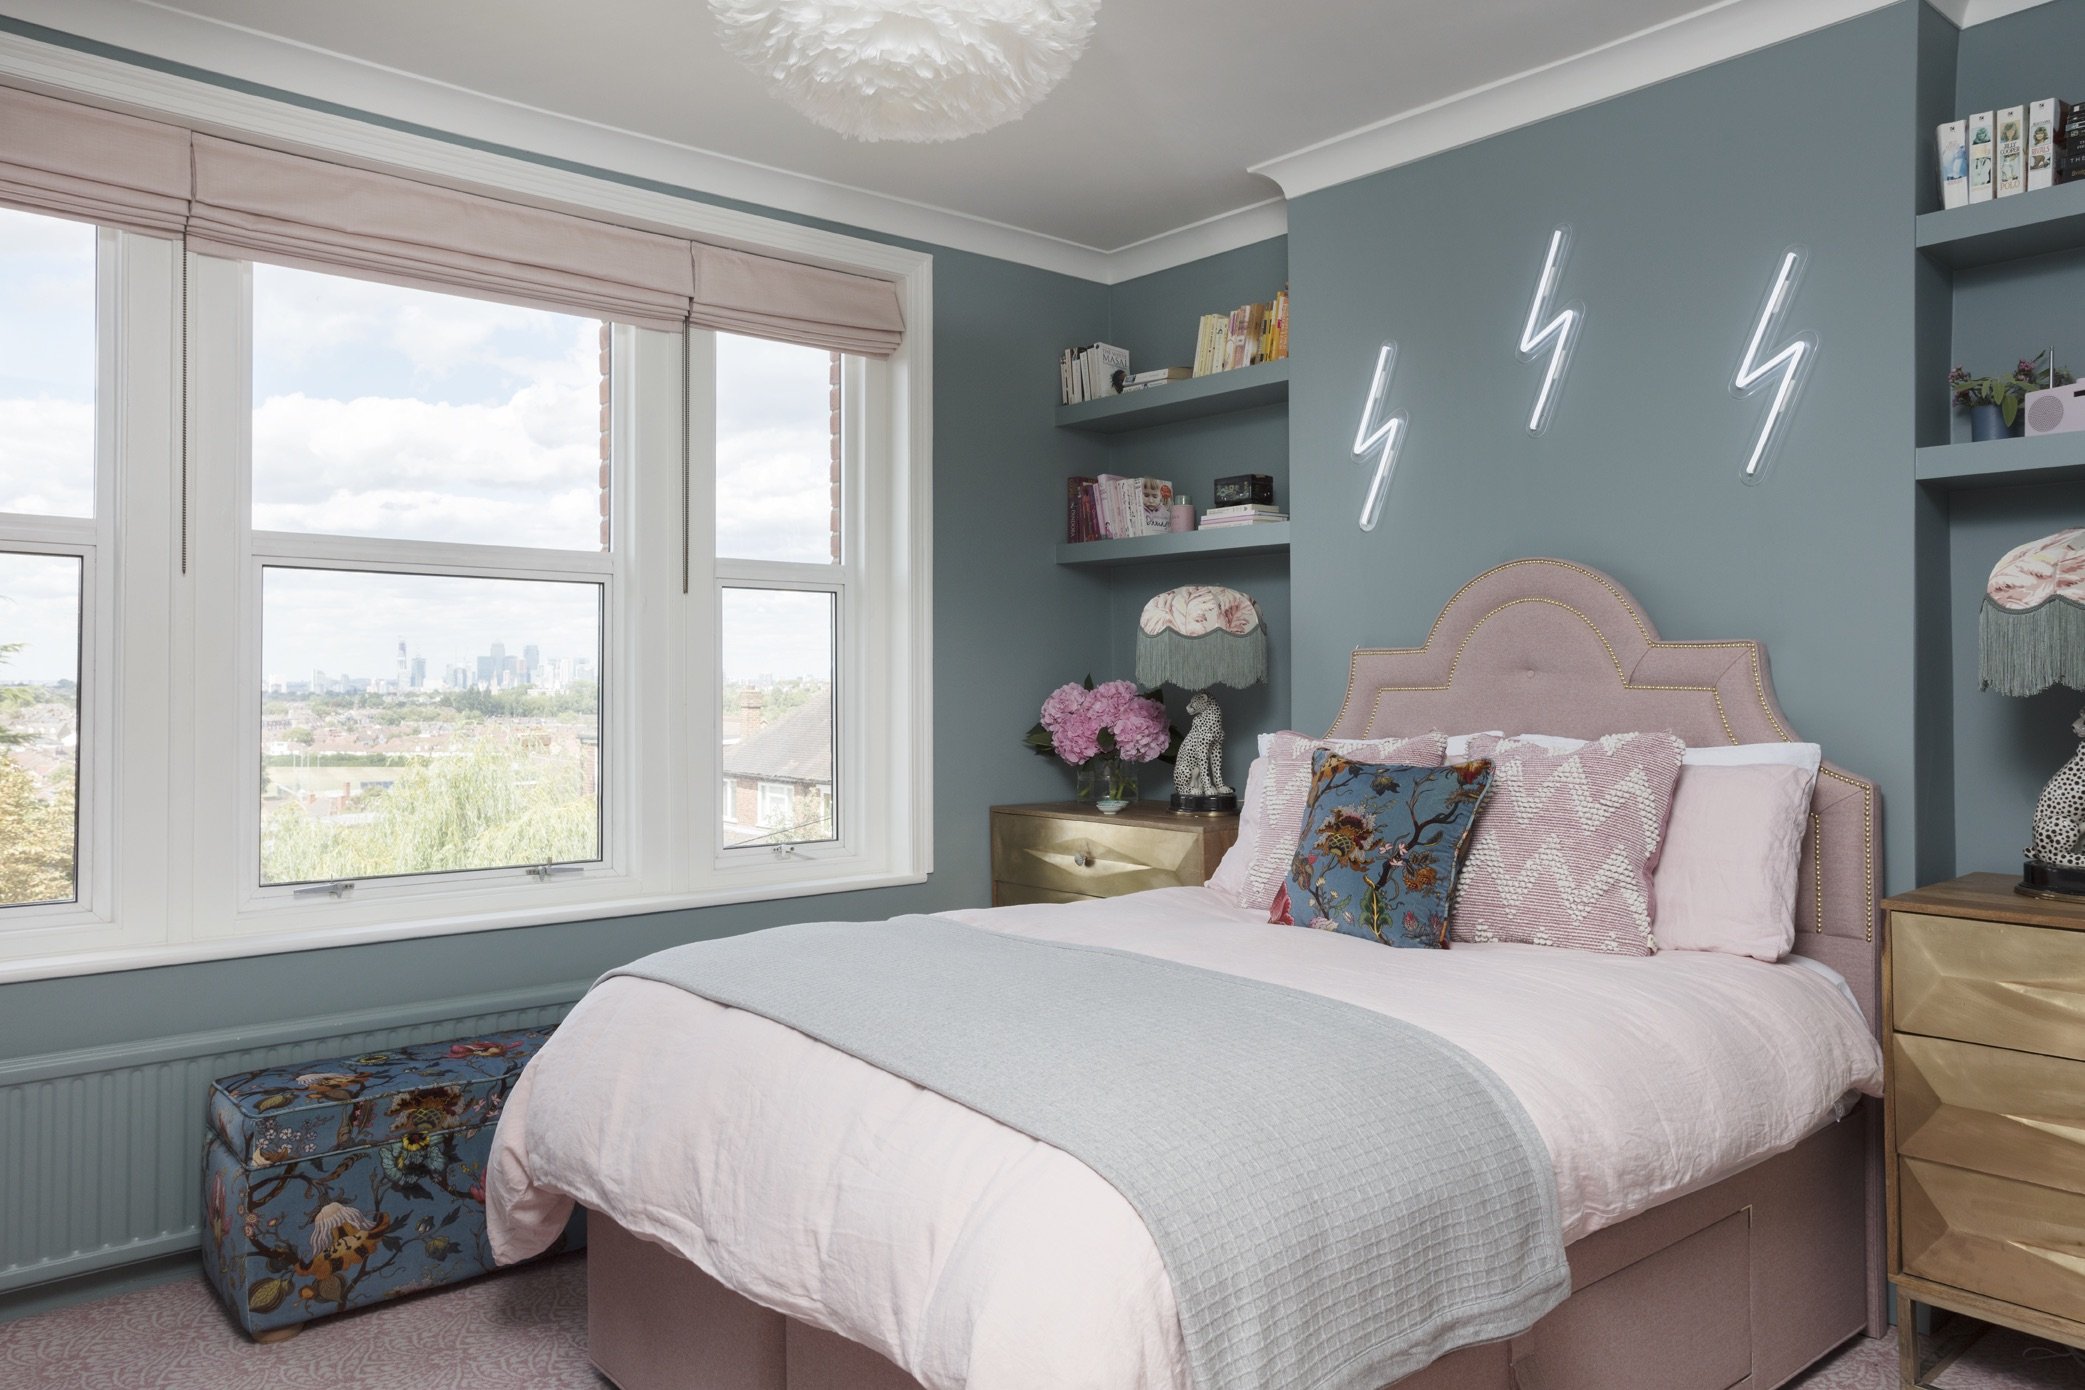 Pink and blue bedroom with pink headboard and neon art